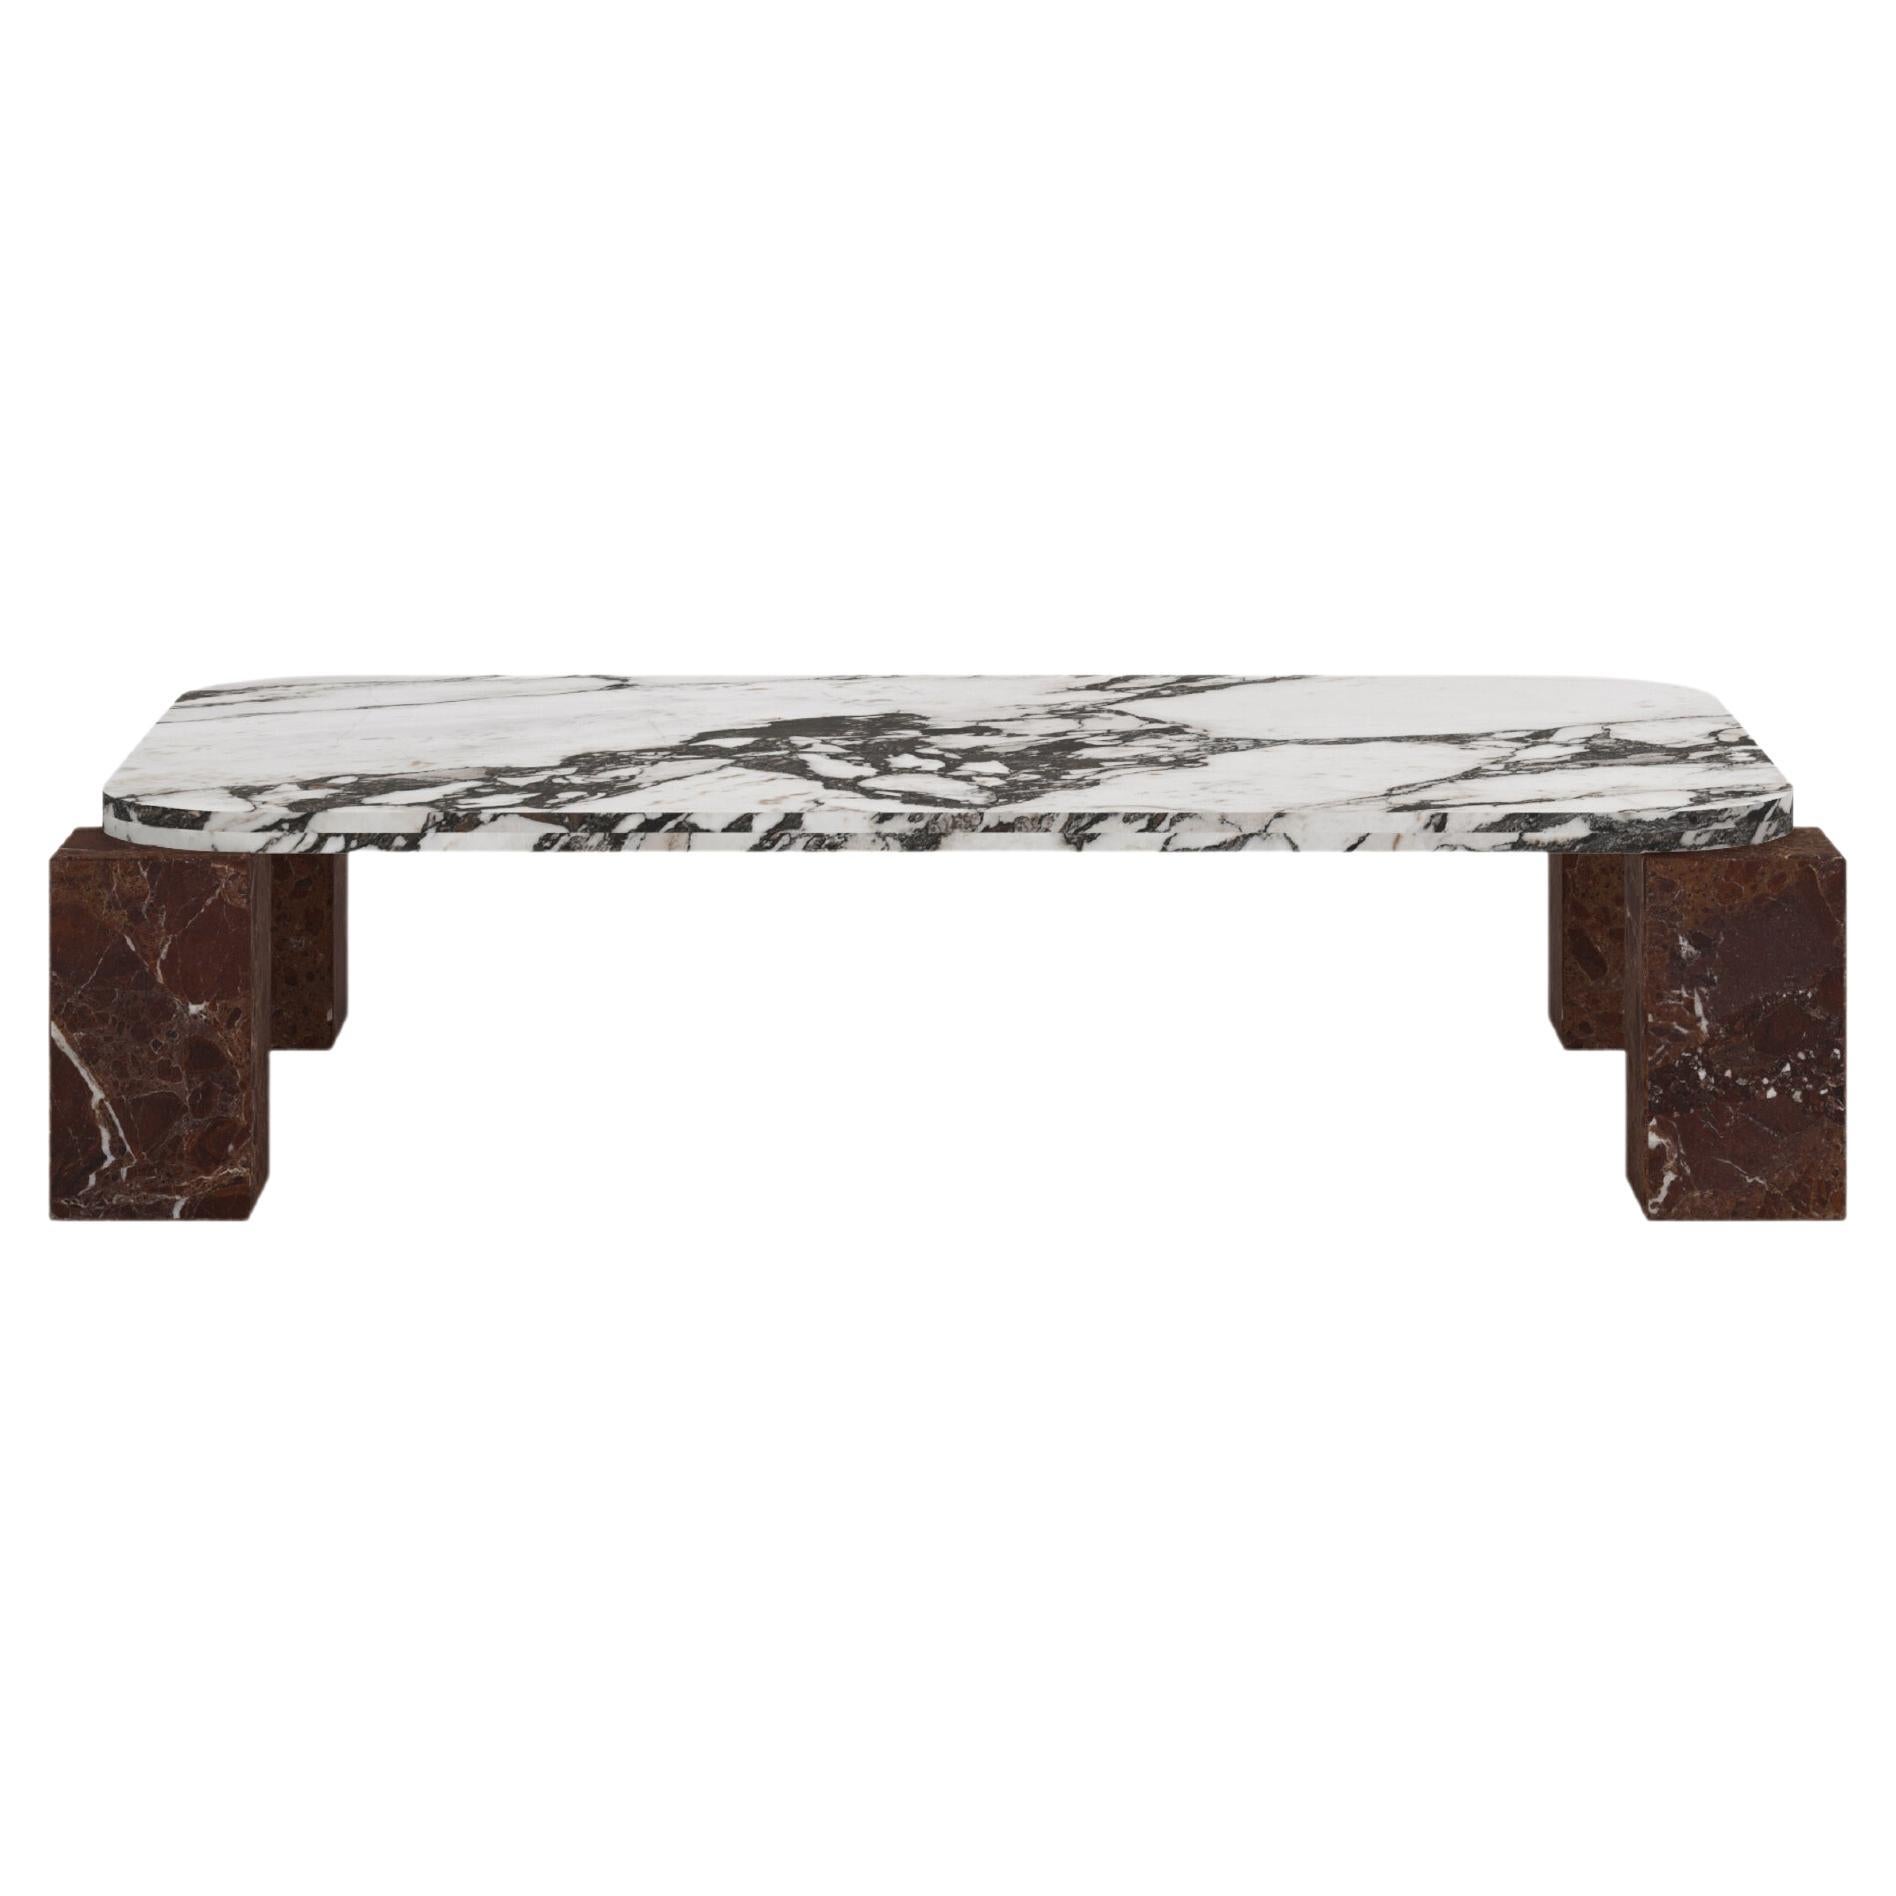 FORM(LA) Cubo Rectangle Coffee Table 50”L x 32”W x 14”H Viola & Rosso Marble For Sale